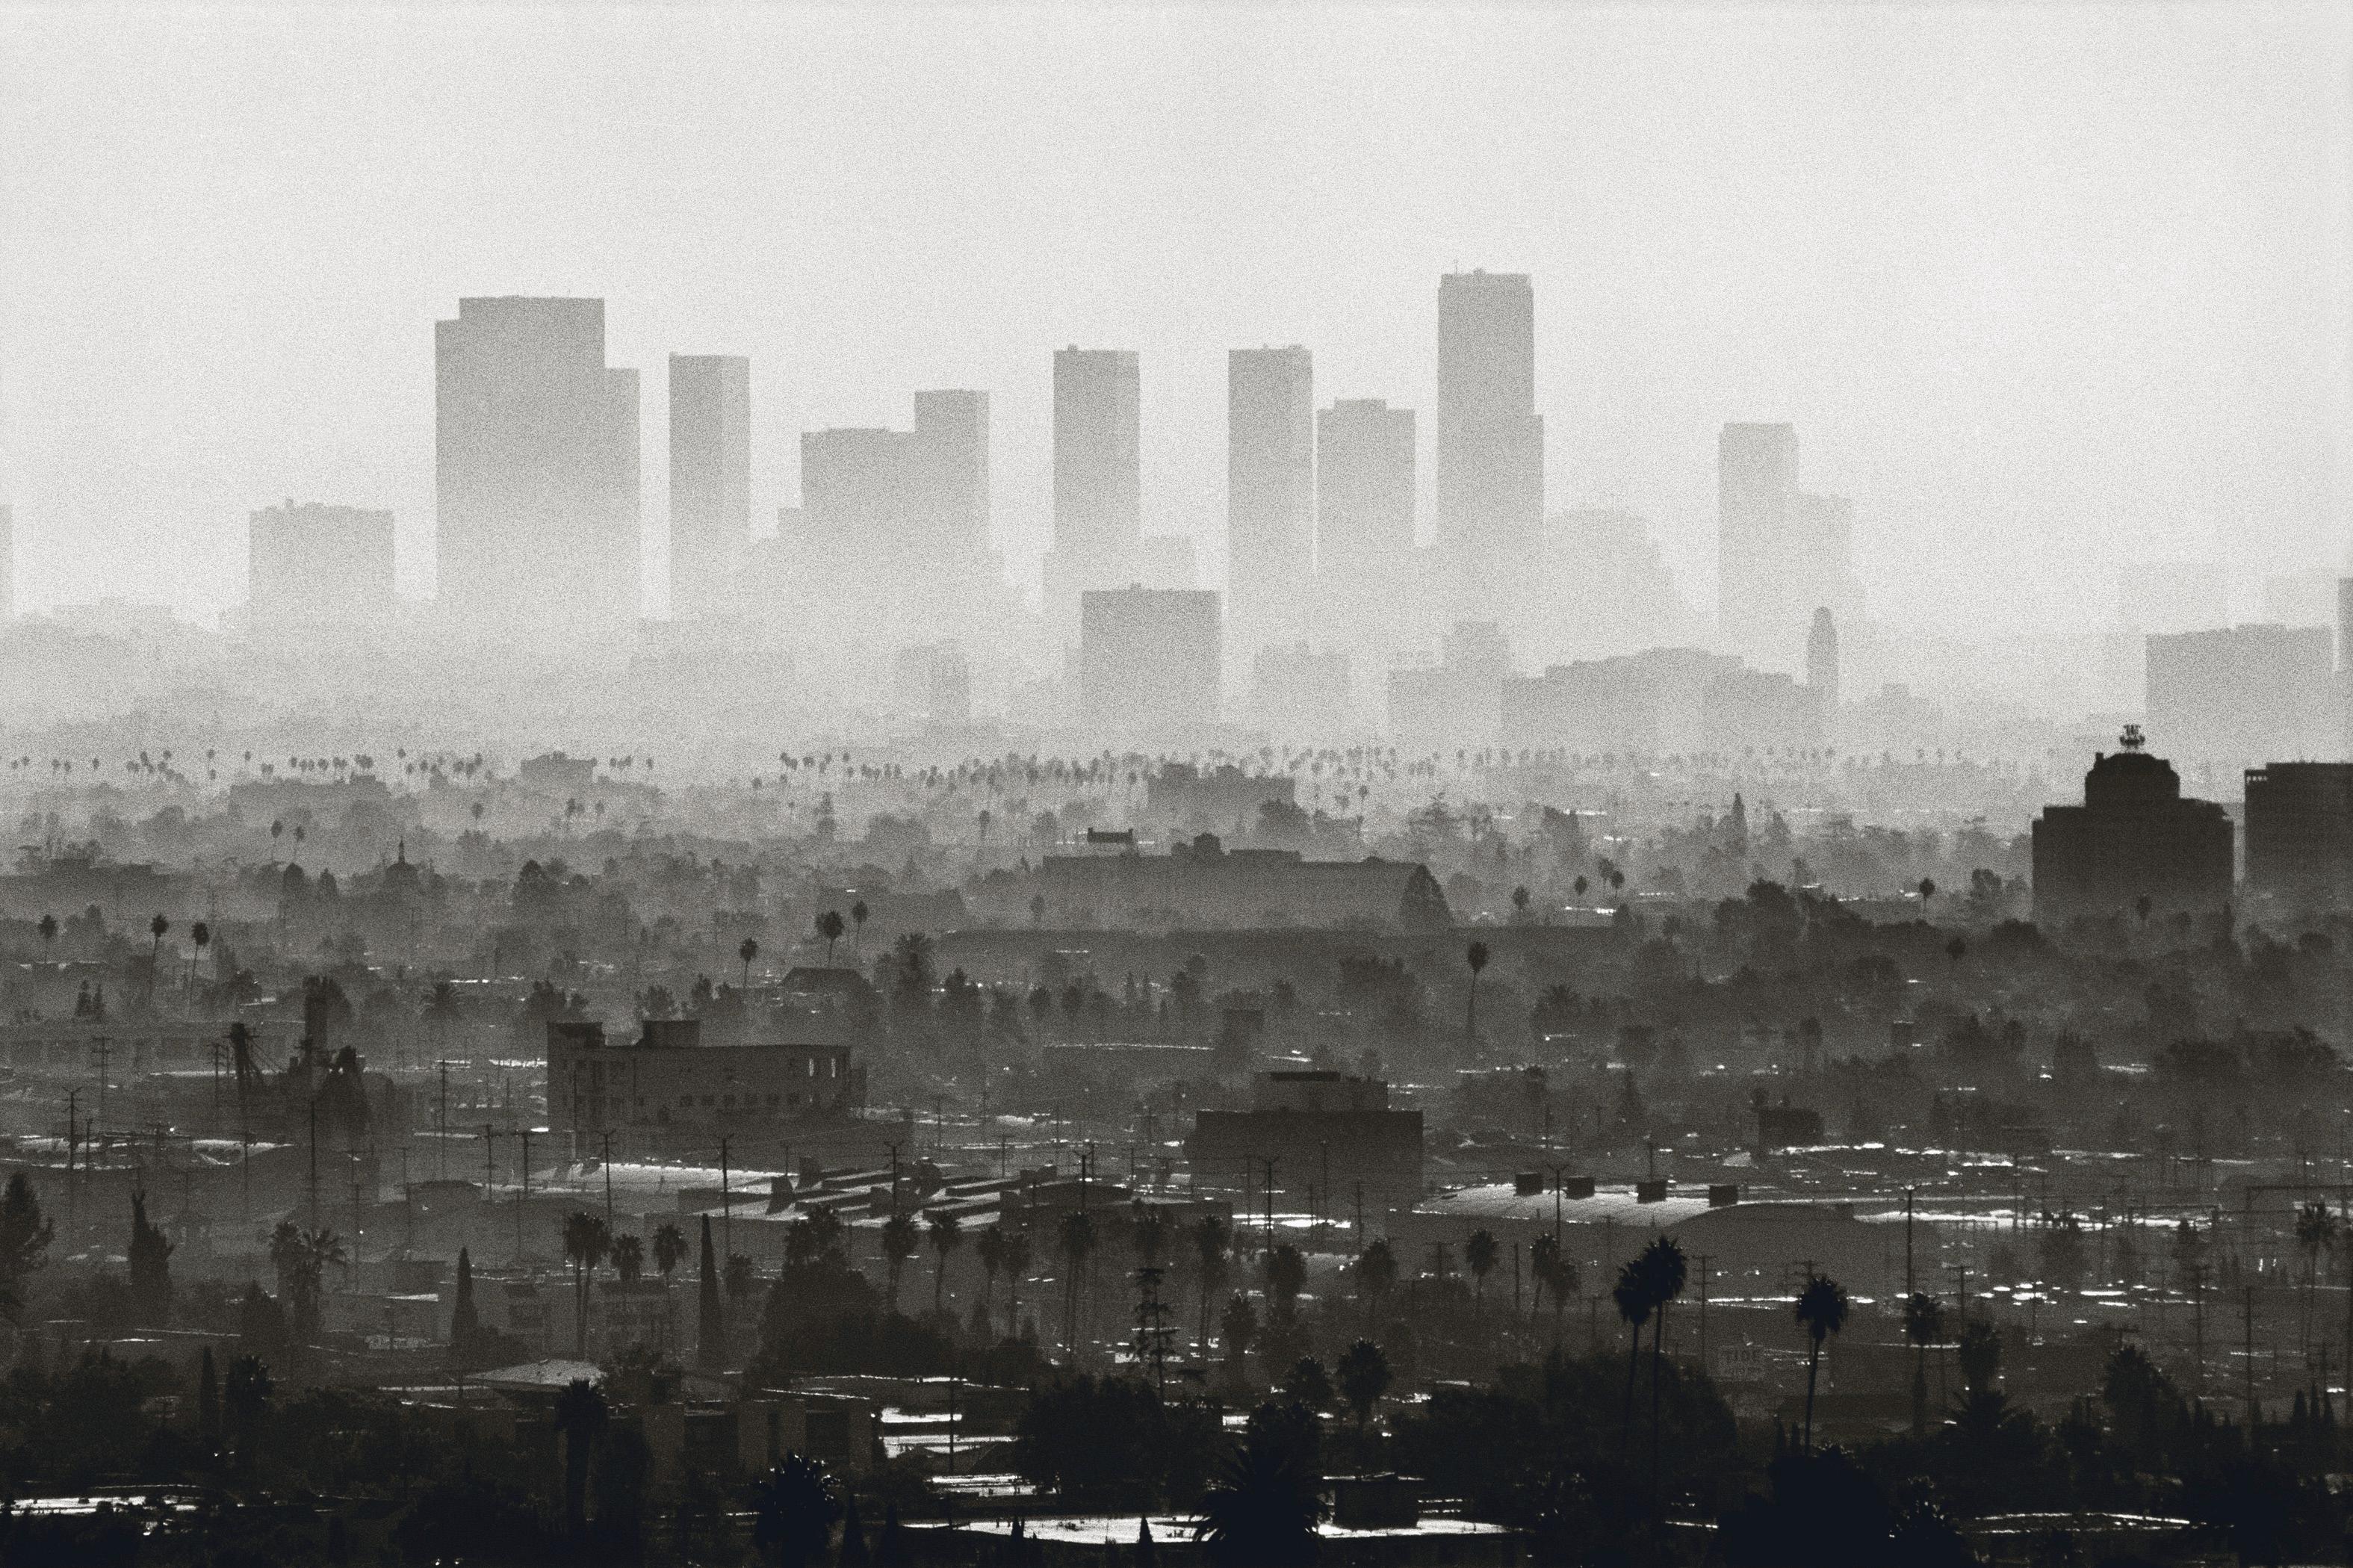 Michael Doster Black and White Photograph - Los Angeles, 1988, Analog Photography, C-Print, Landscape, black and white